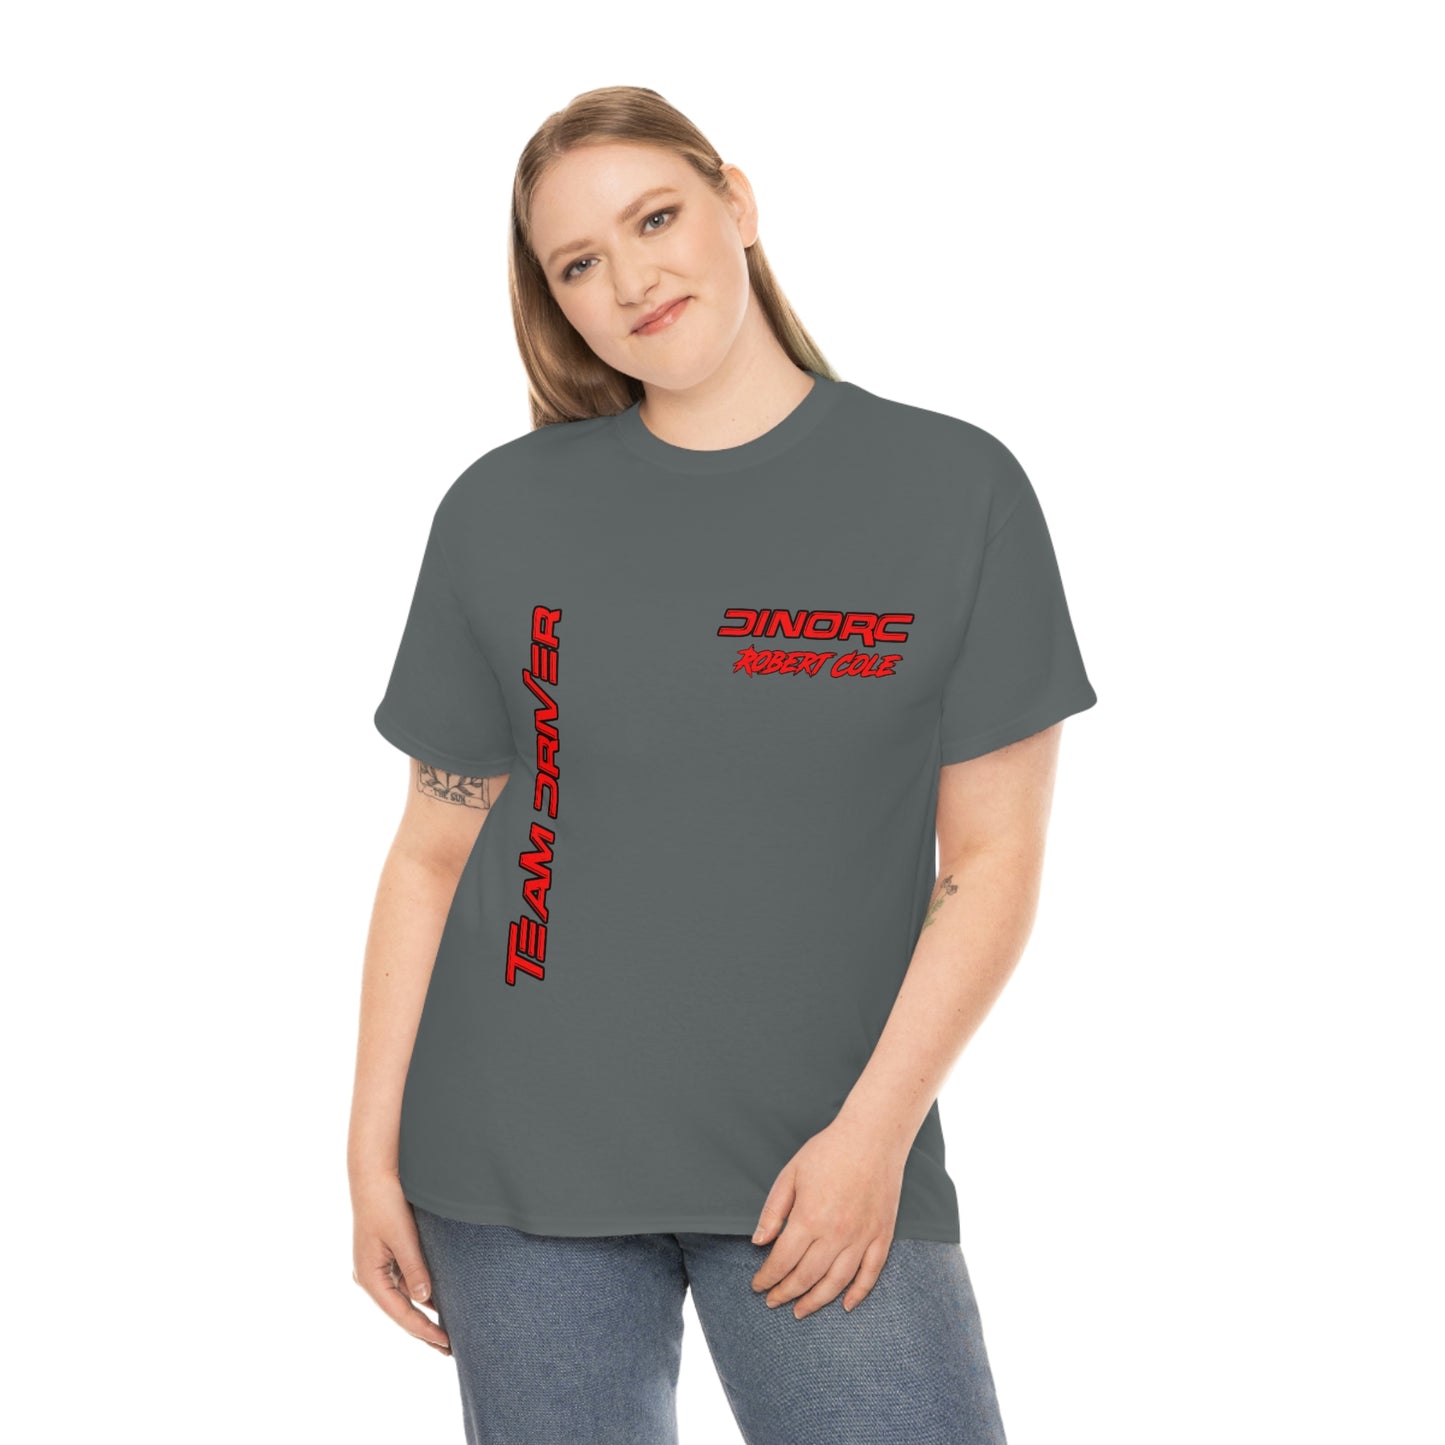 Team Driver Robert Cole Front and Back DinoRc Logo T-Shirt S-5x 5 colors